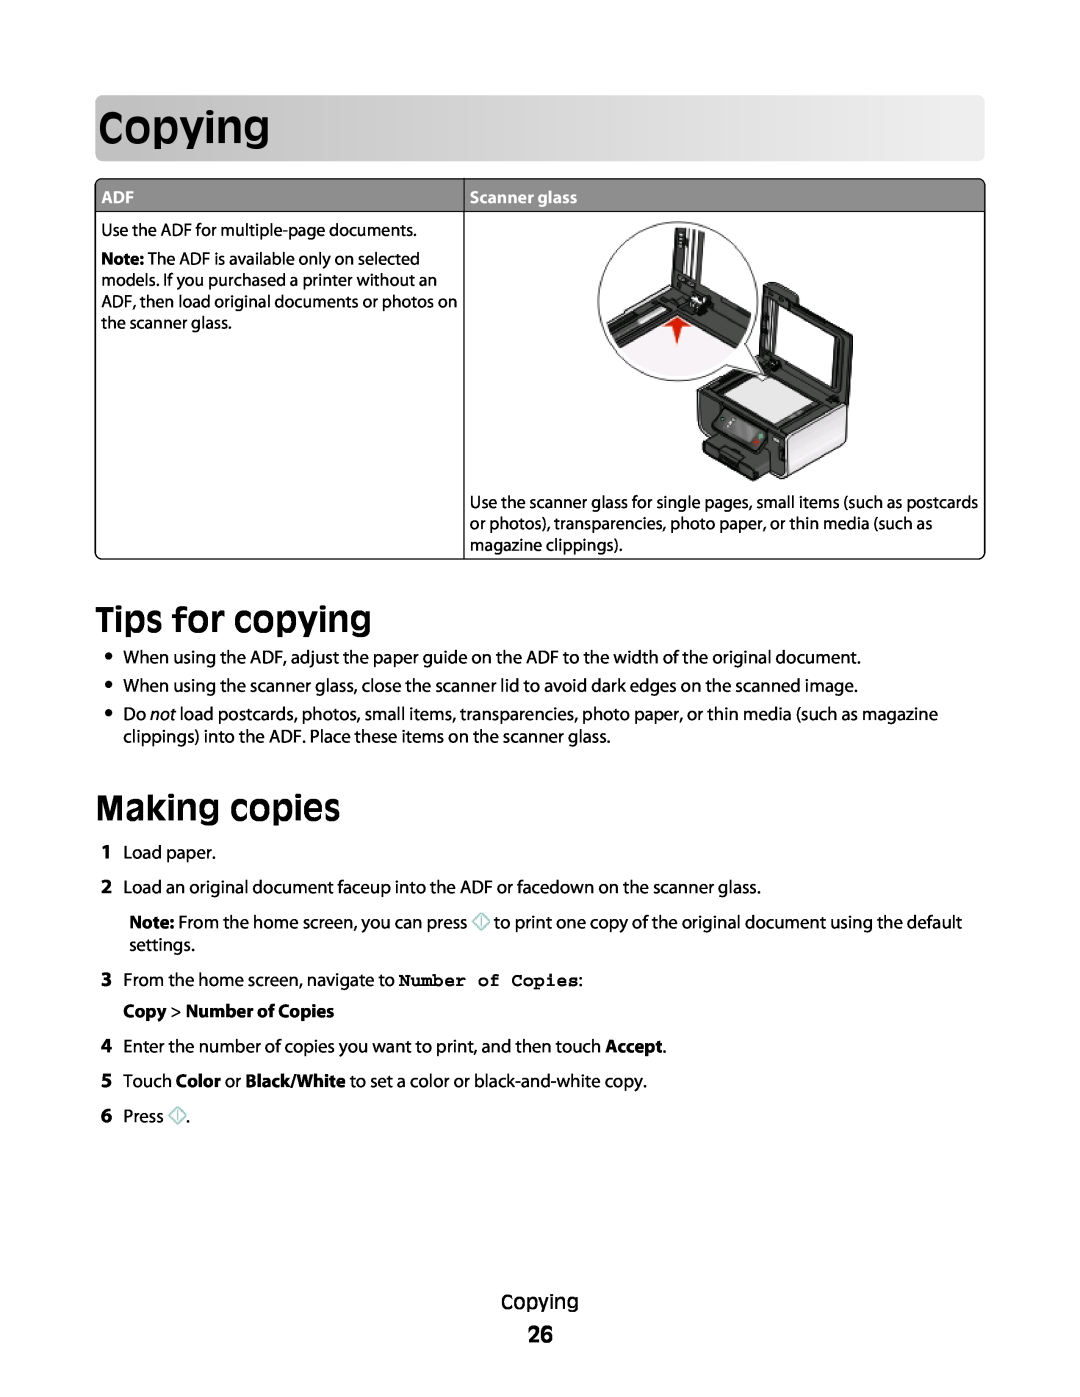 Lexmark Pro803, Pro800 manual Copying, Tips for copying, Making copies 